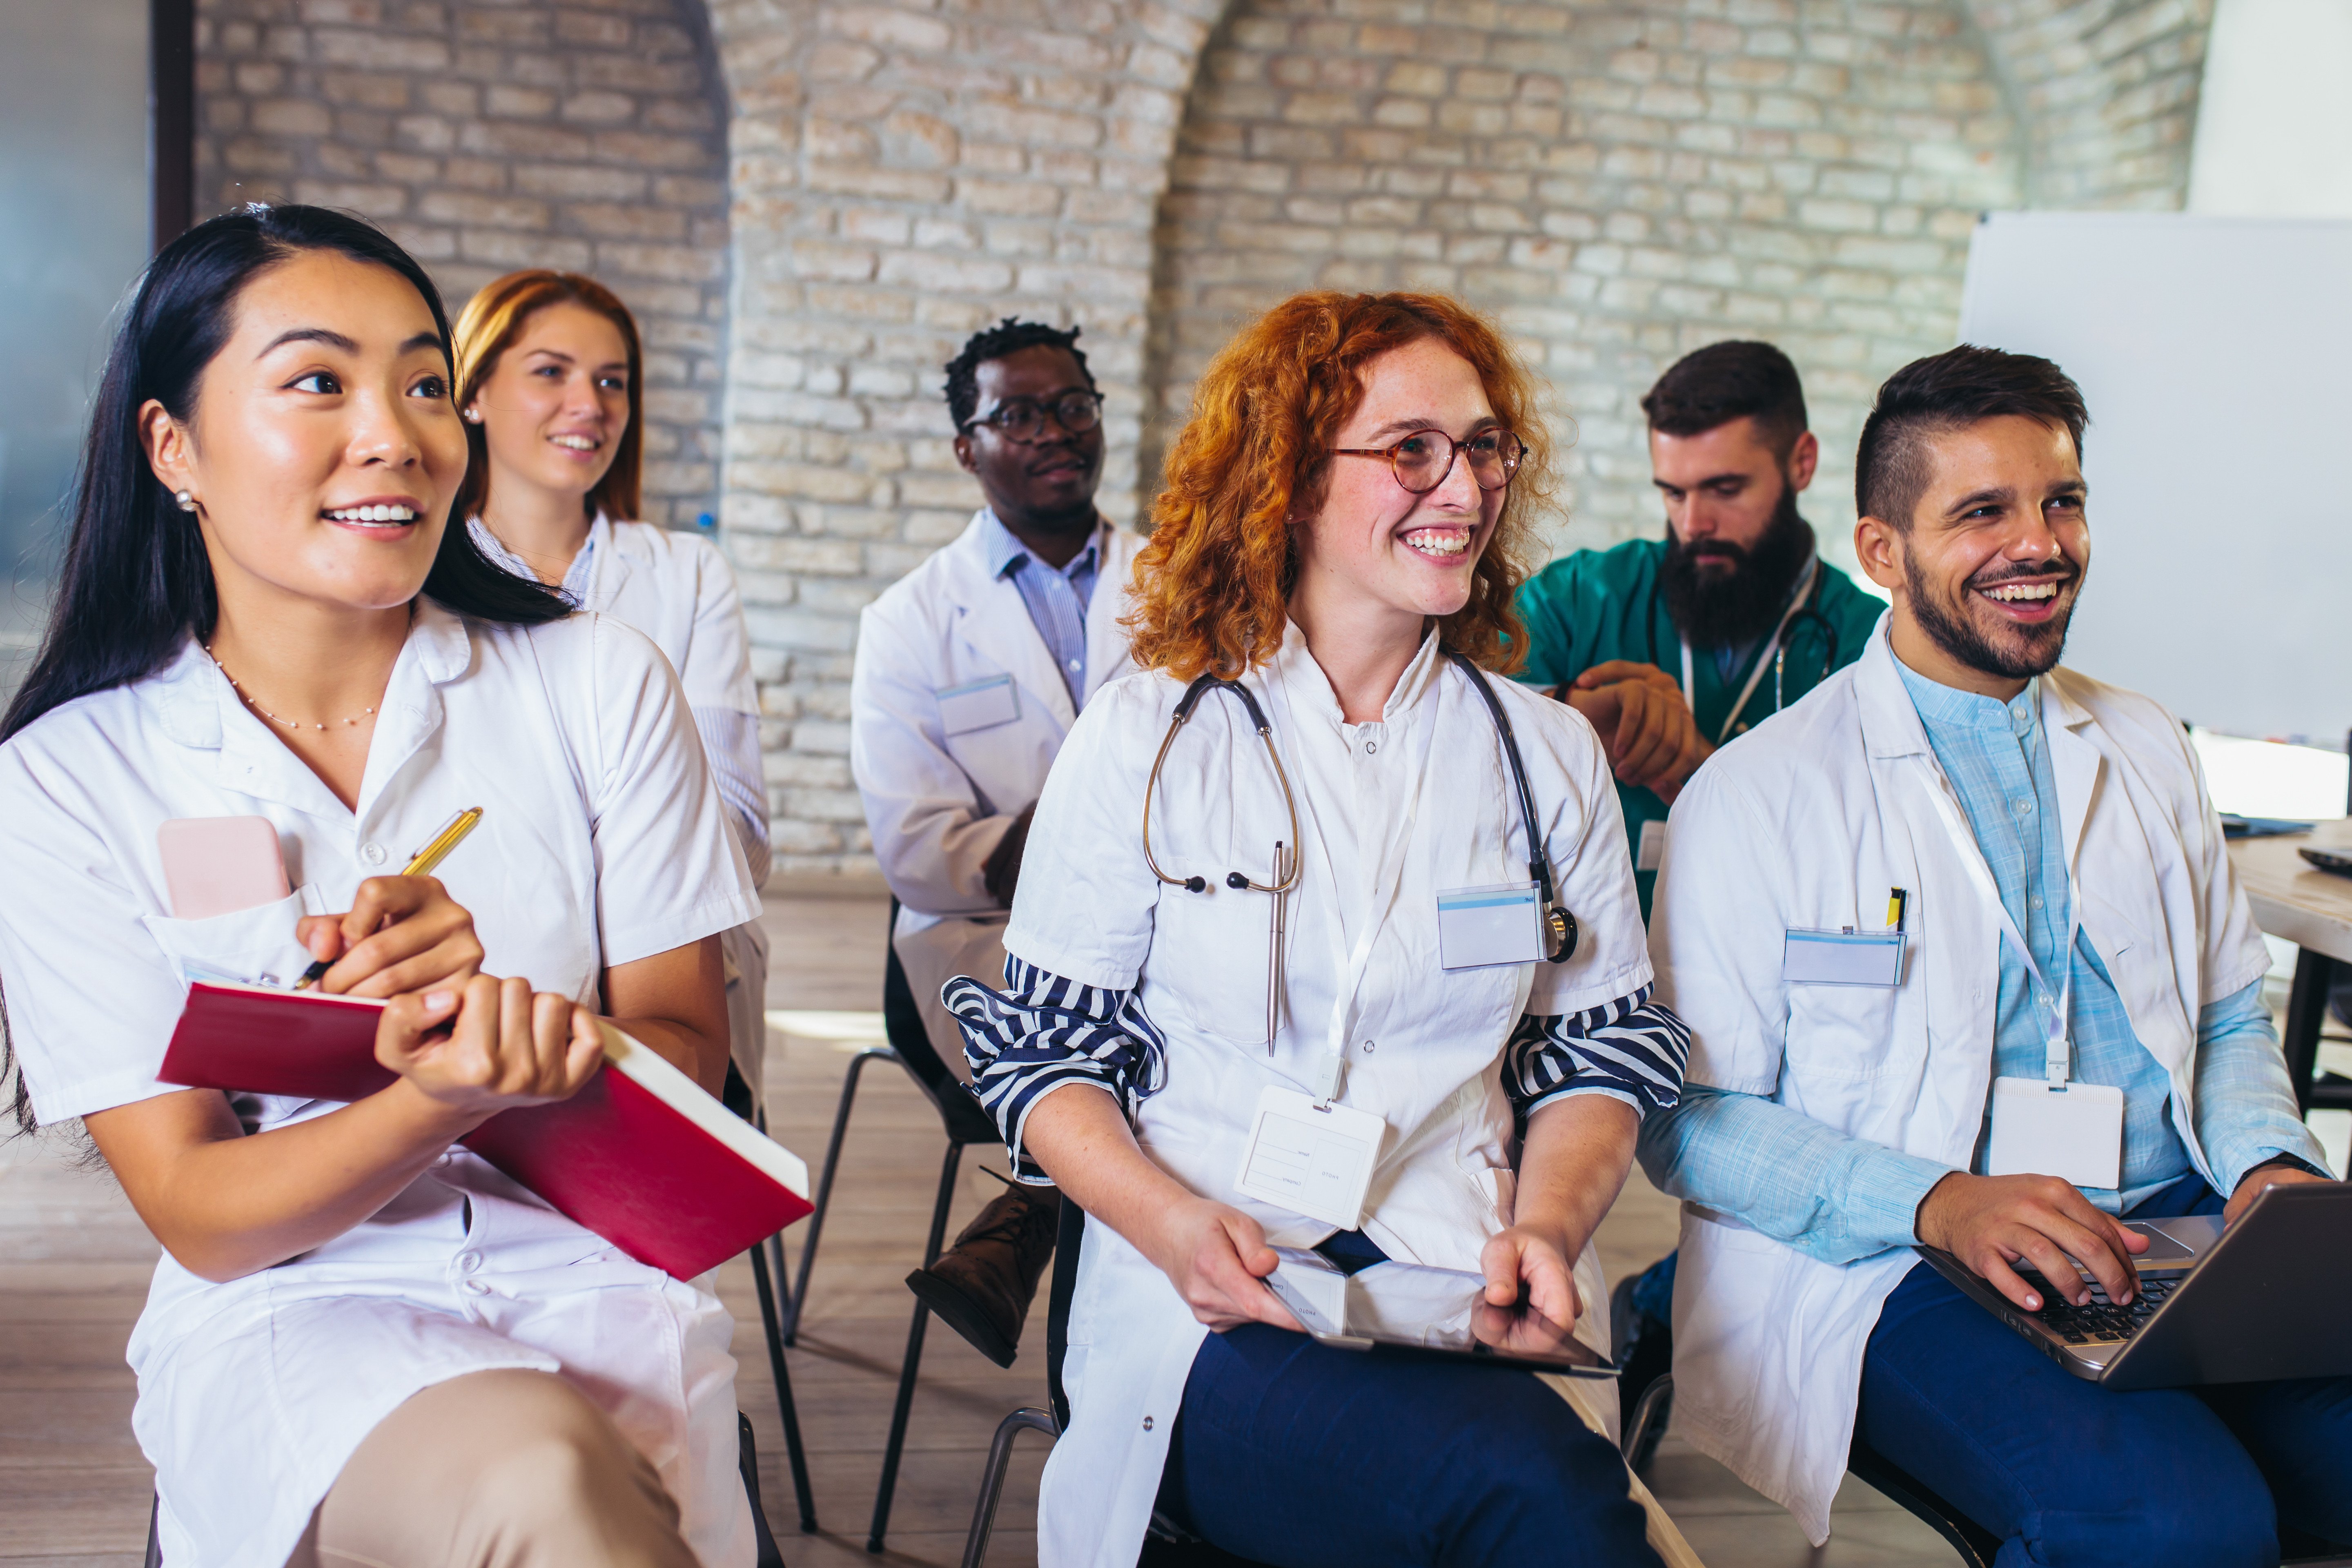 How Physician Recruiters Can Be a Resource to Medical Students and Residents